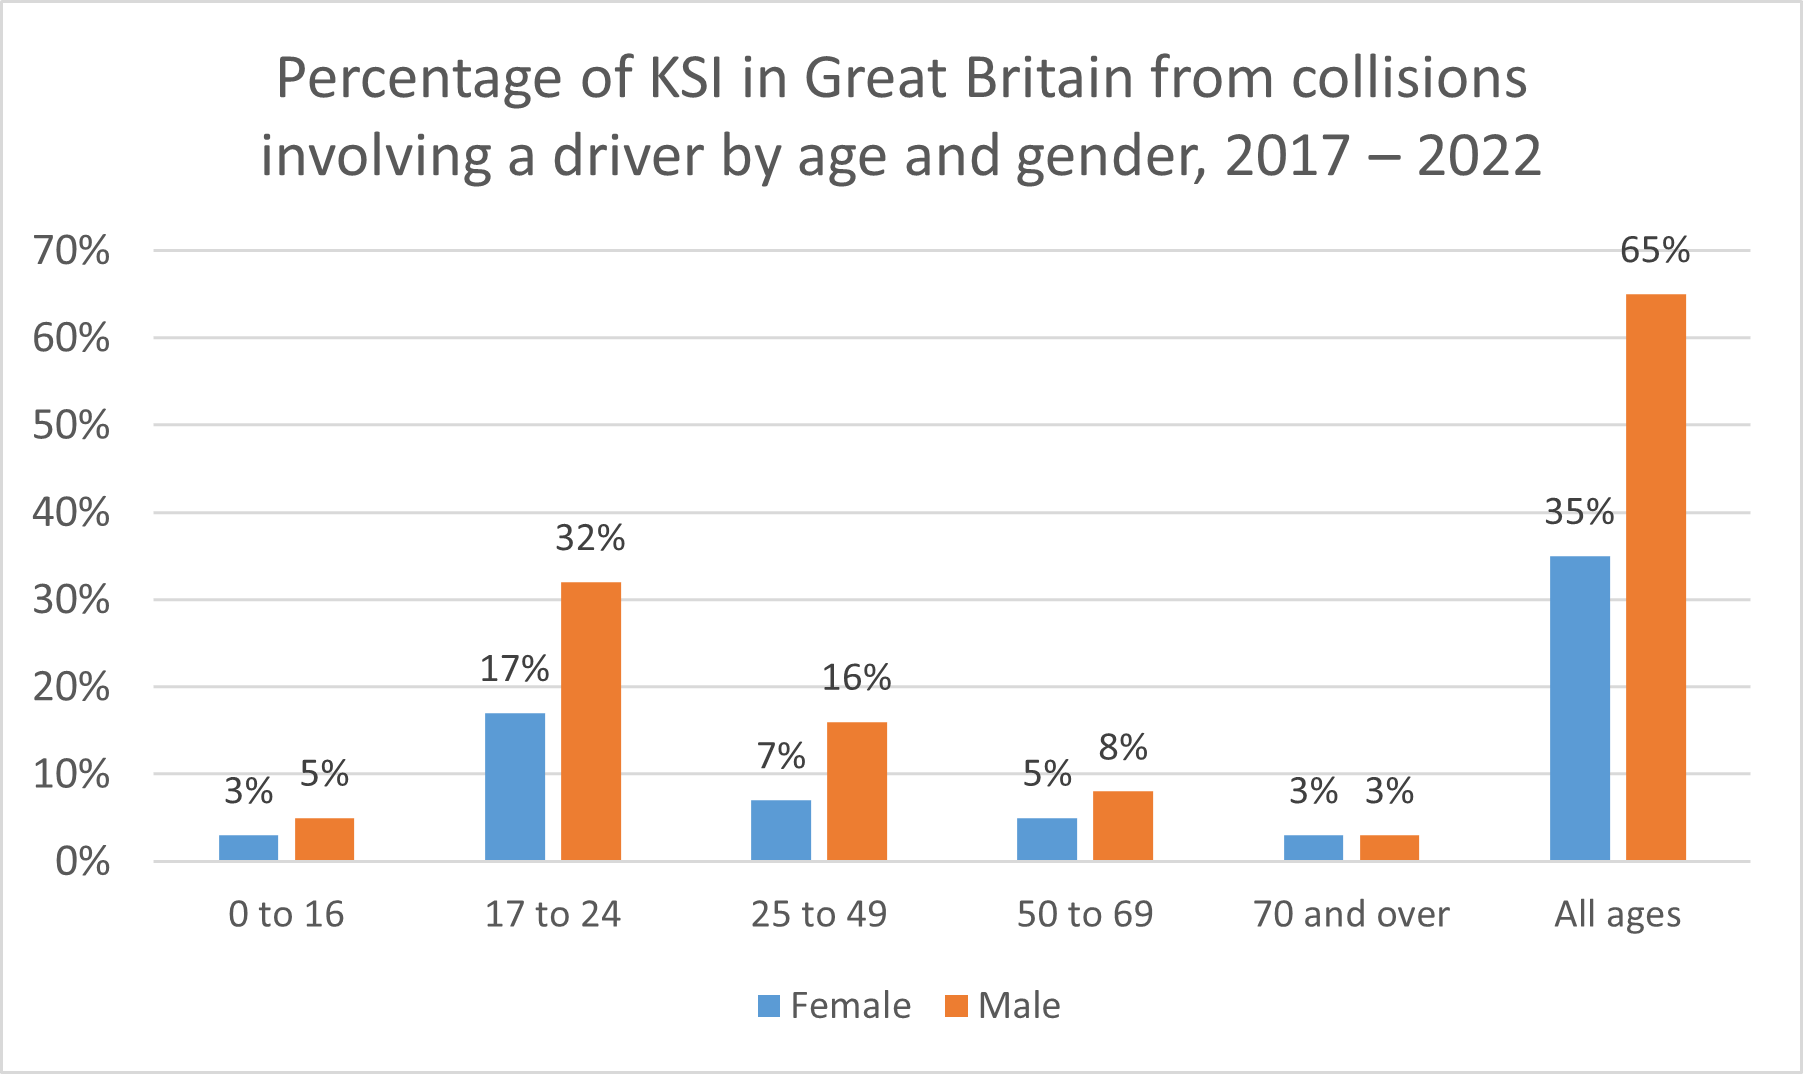 KSI percentages by gender and age